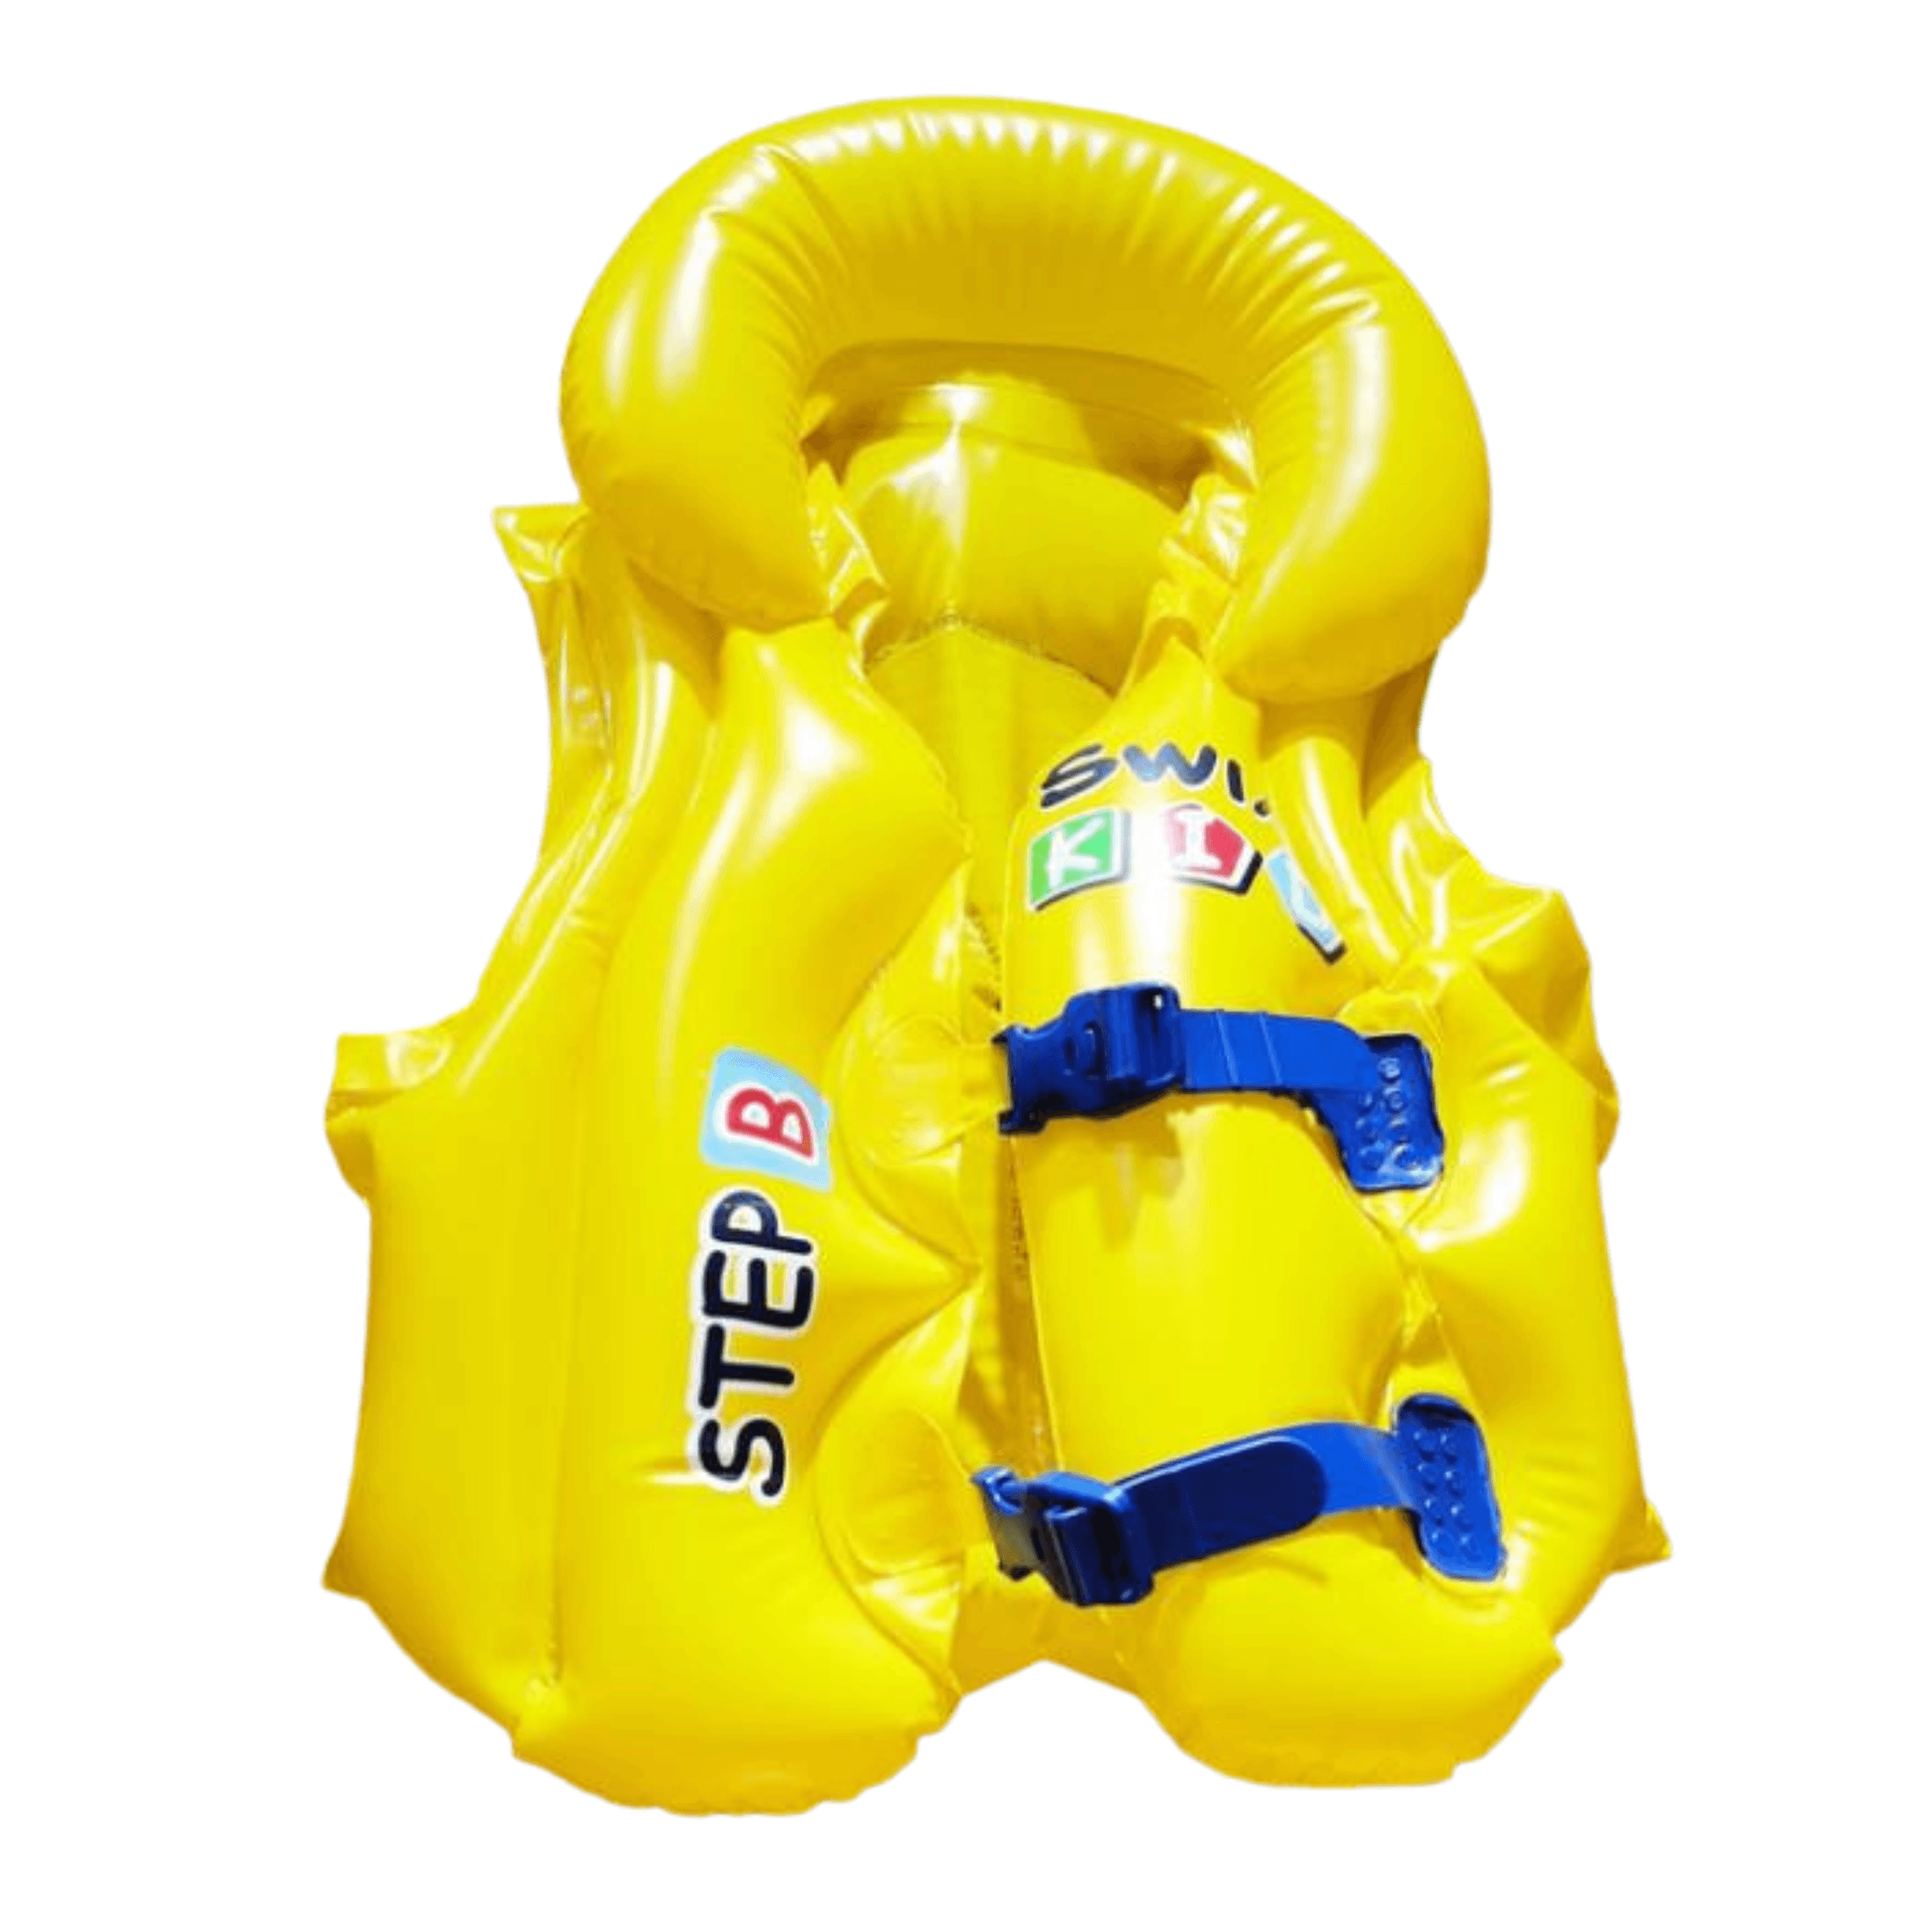 Swimming learning vest - Yellow